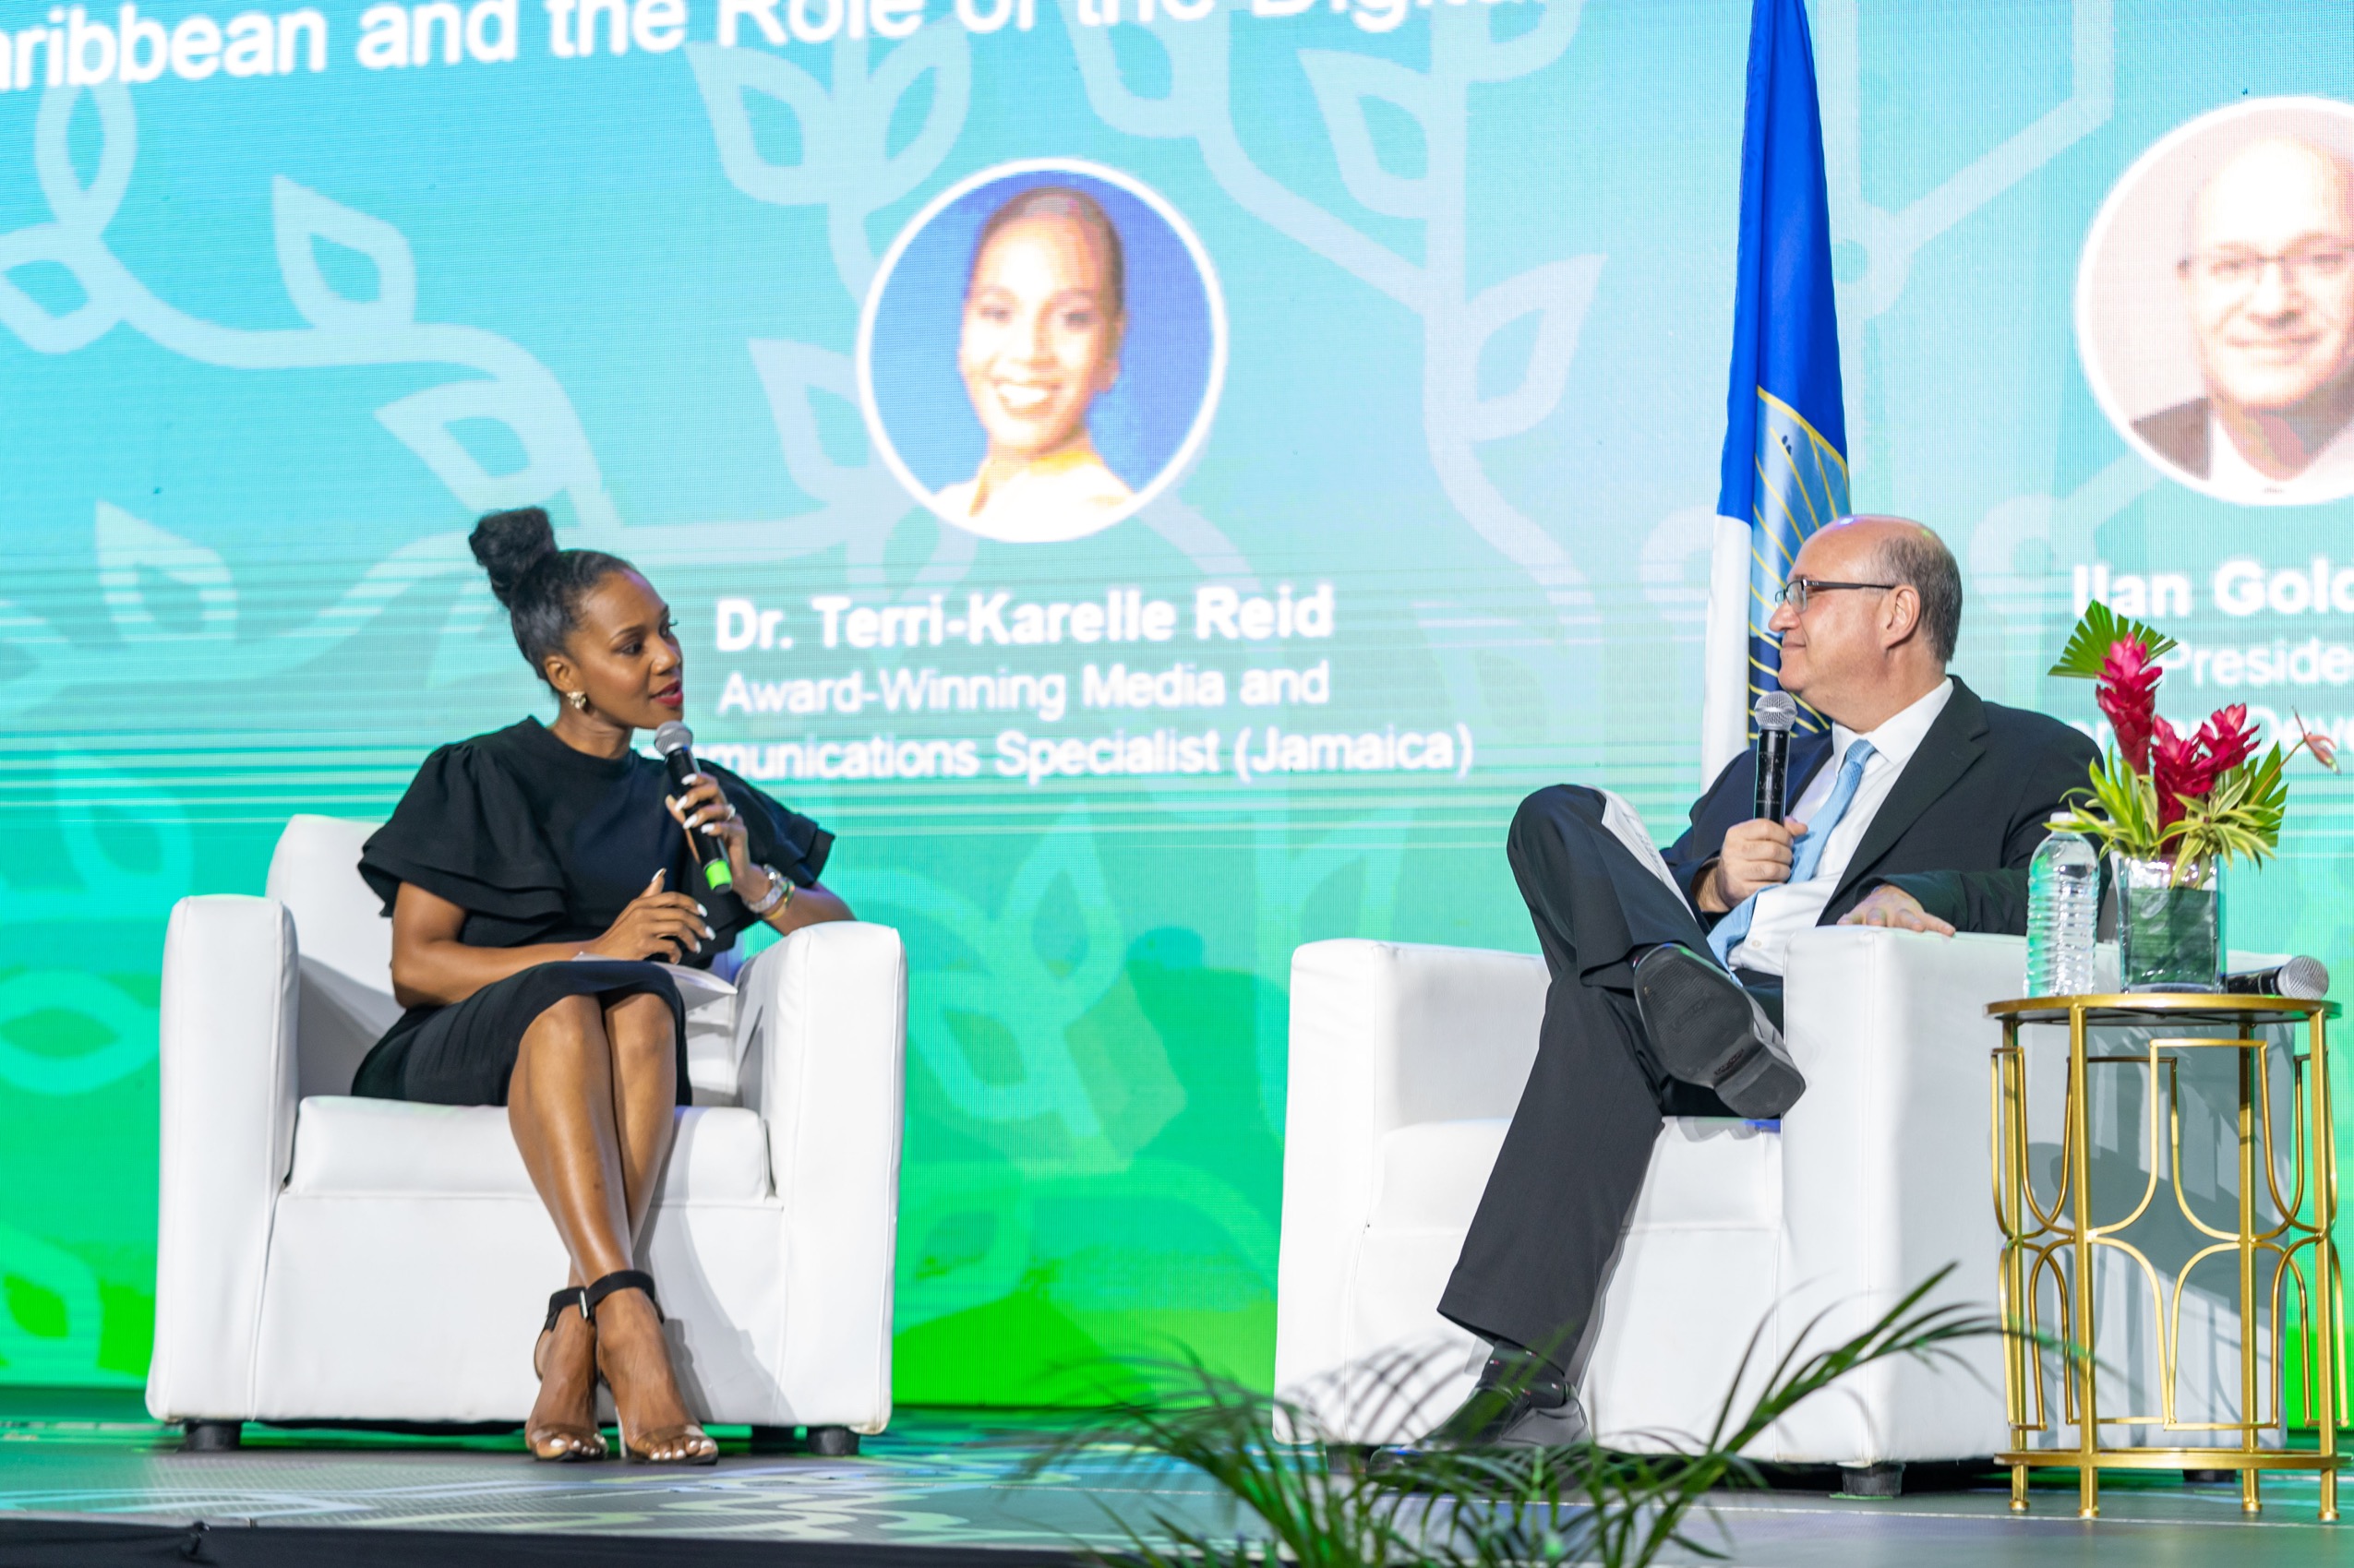 Dr. Terri-Karelle Reid interviews Ilan Goldfajn, President of the Inter-American Development Bank at the 2023 Outsource2LAC Summit held in Jamaica